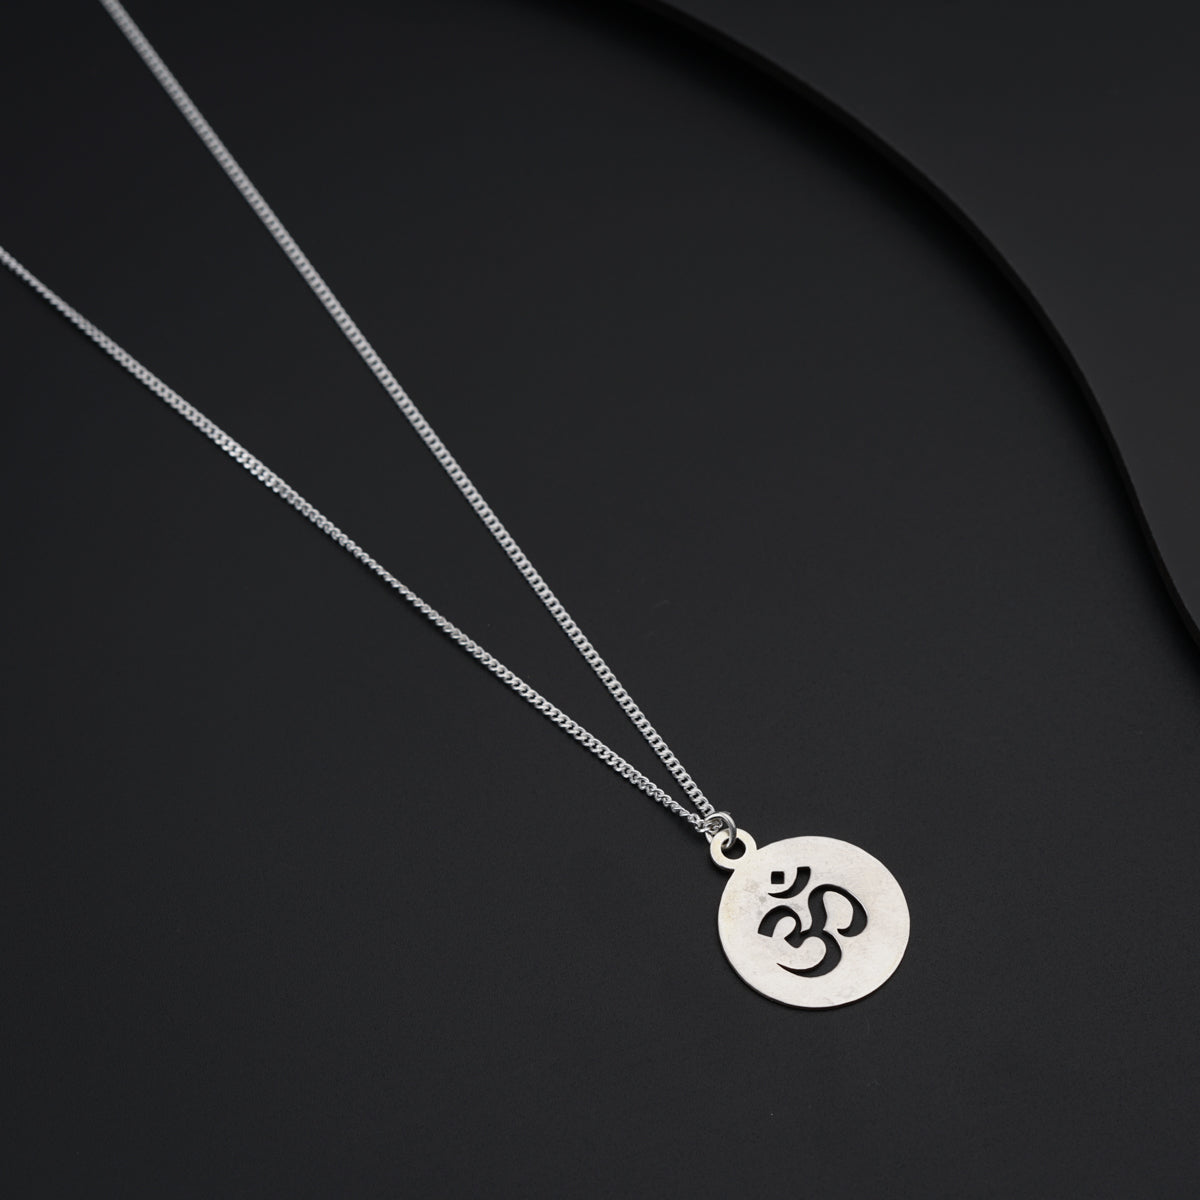 a silver necklace with a silver pendant with the number 35 on it